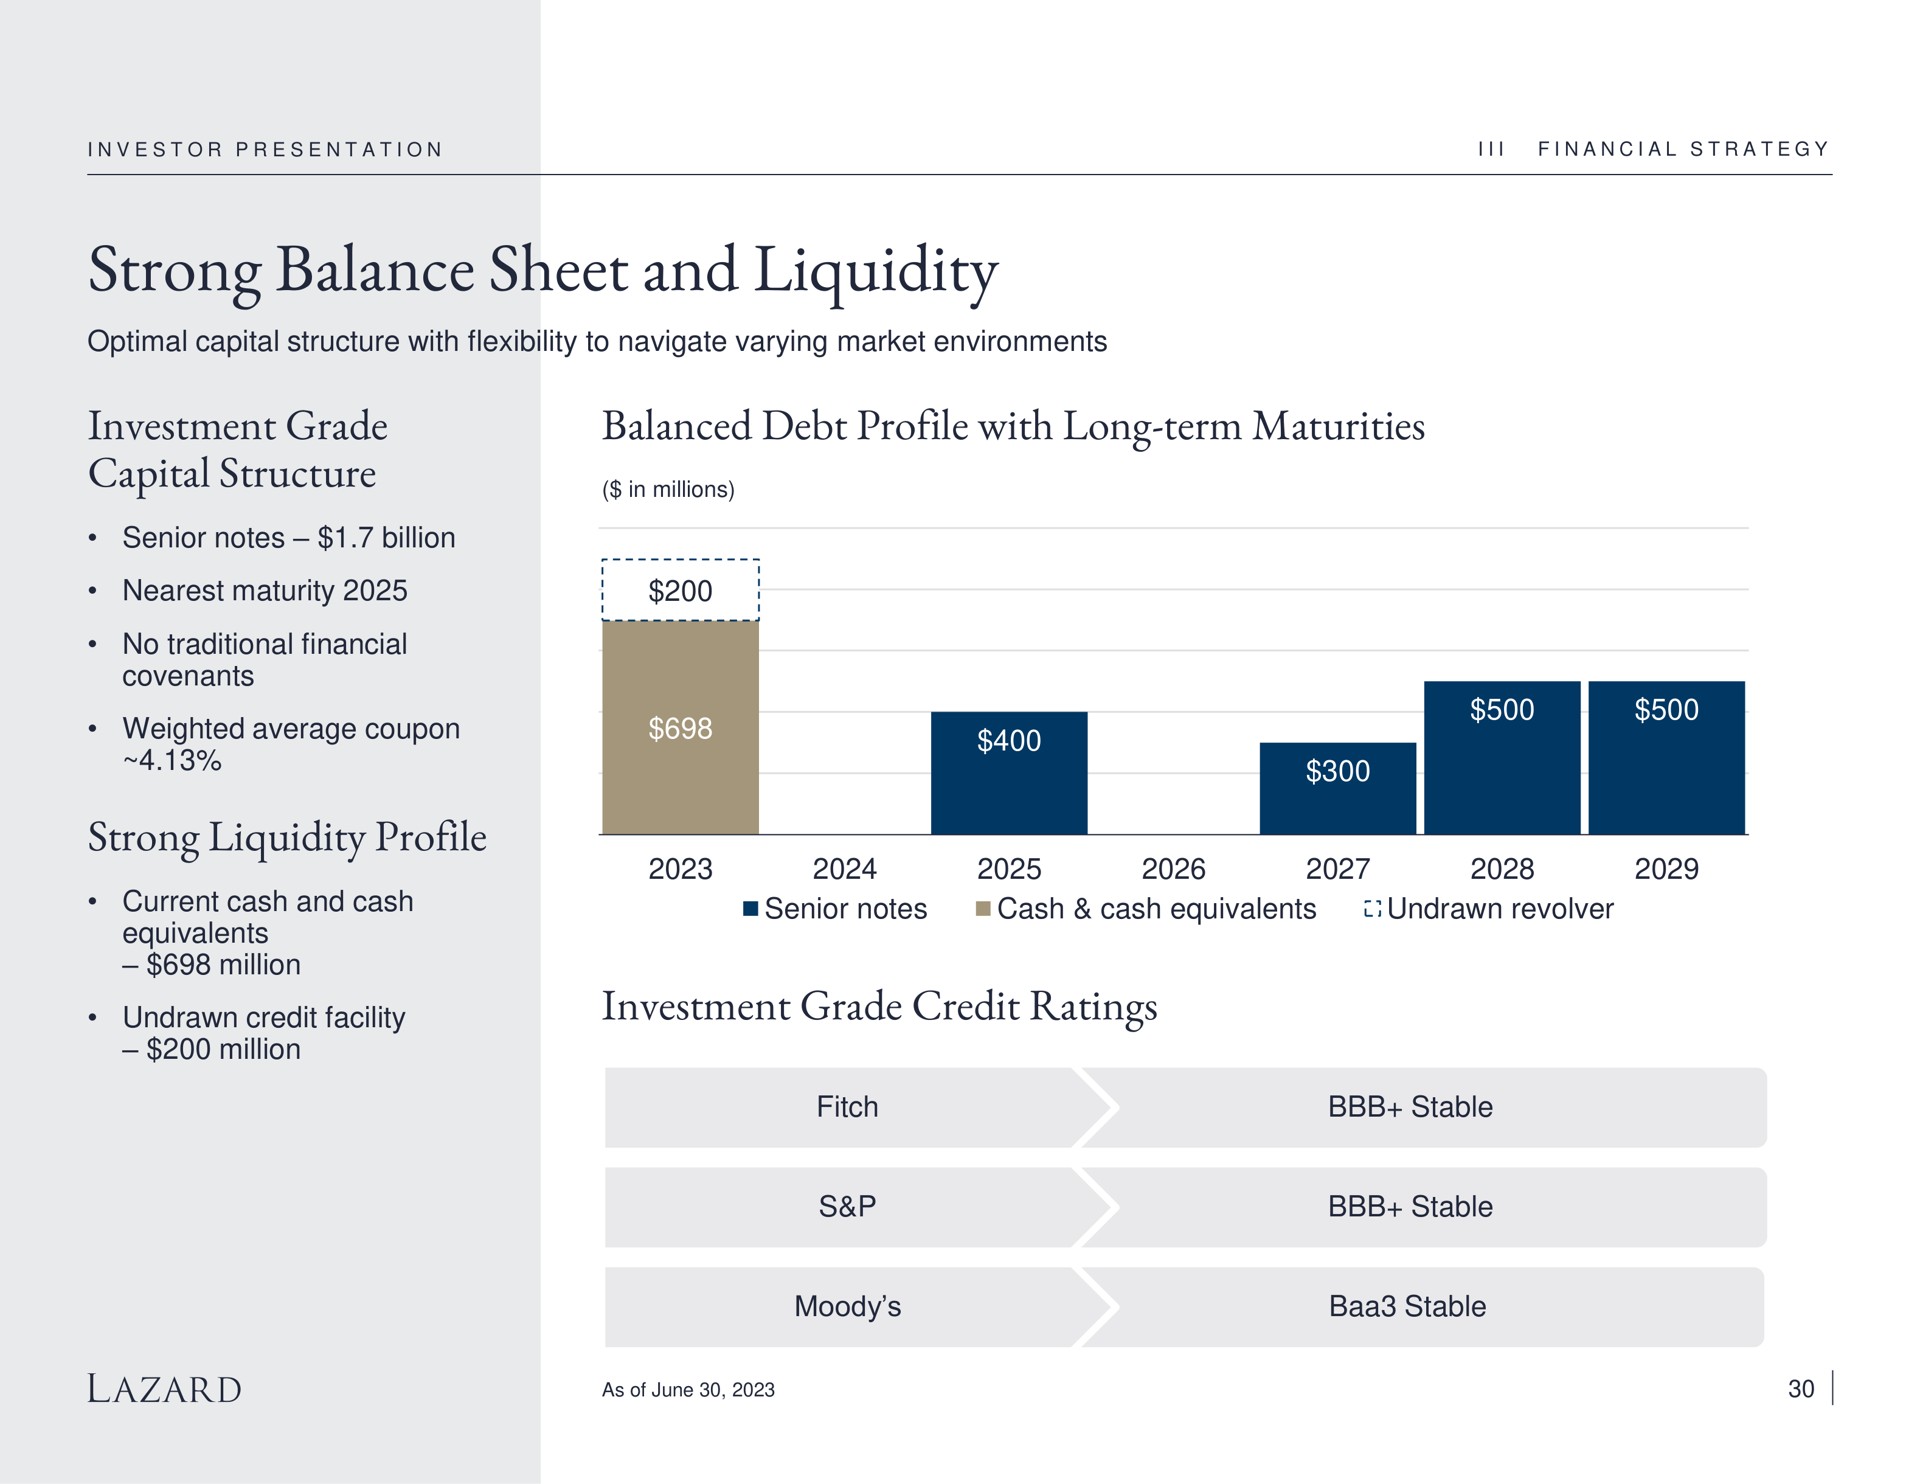 strong balance sheet and liquidity investment grade capital structure balanced debt profile with long term maturities strong liquidity profile investment grade credit ratings | Lazard